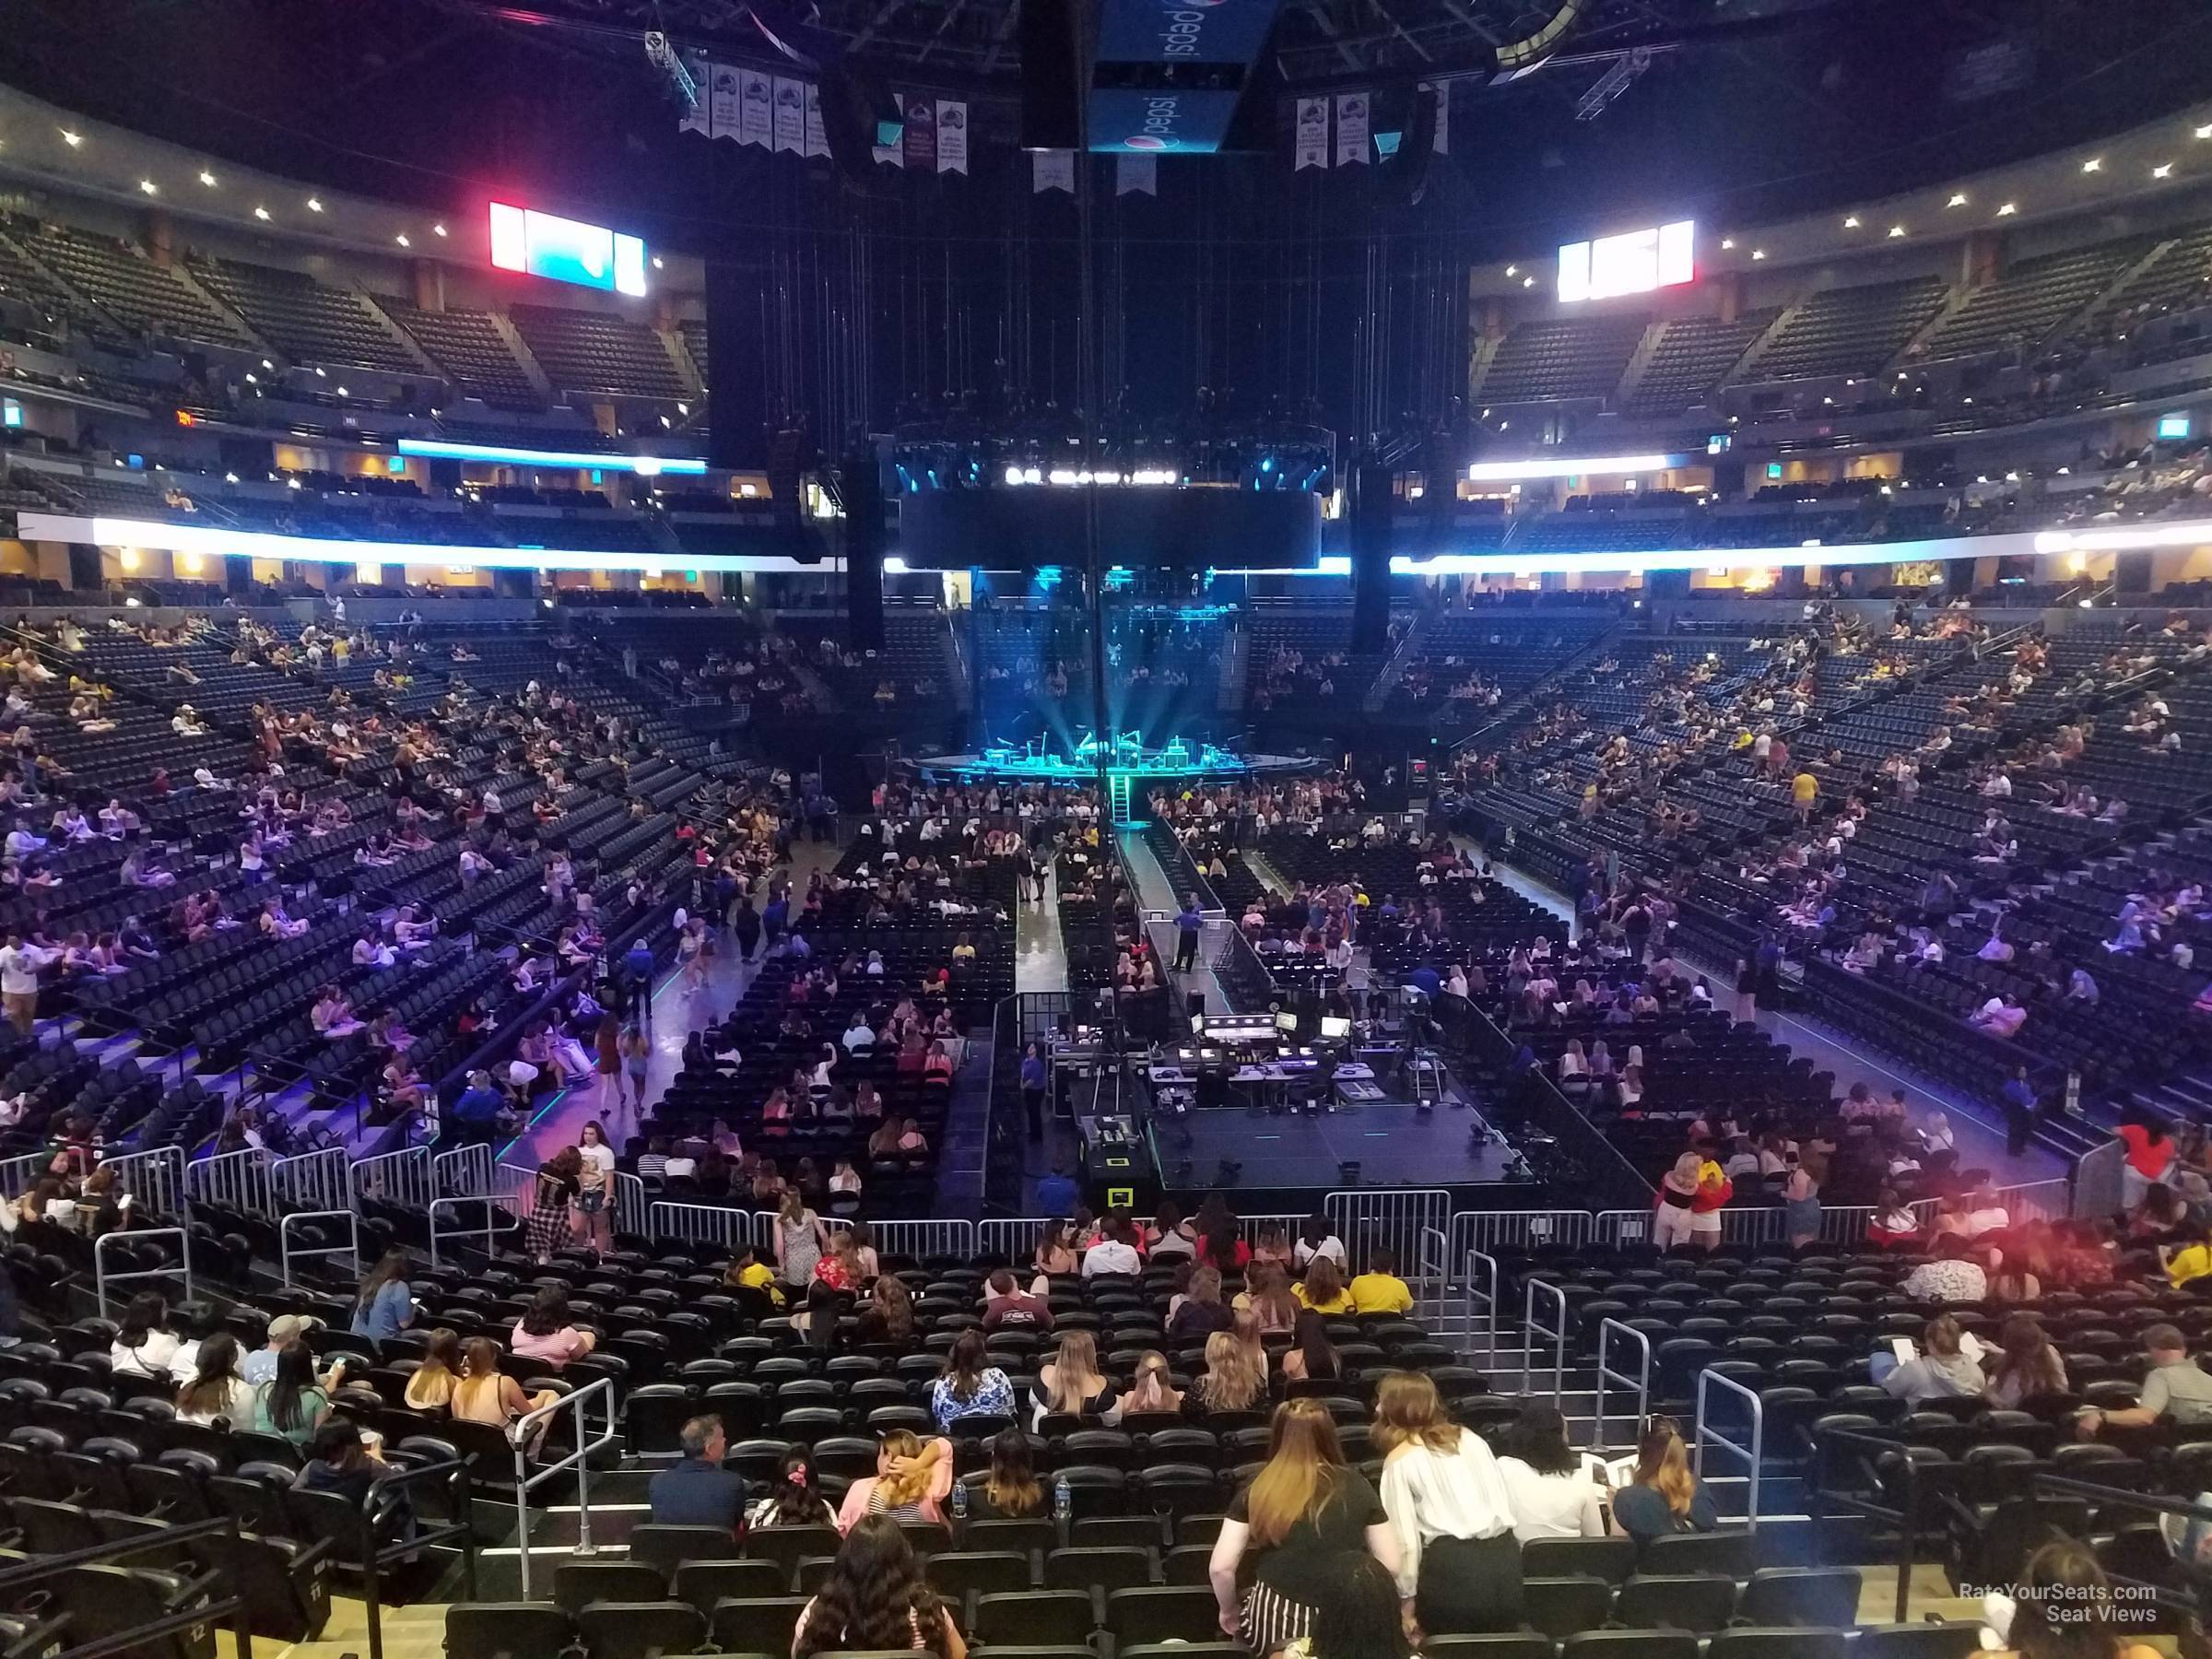 Pepsi Center Section 114 Concert Seating - RateYourSeats.com2400 x 1800